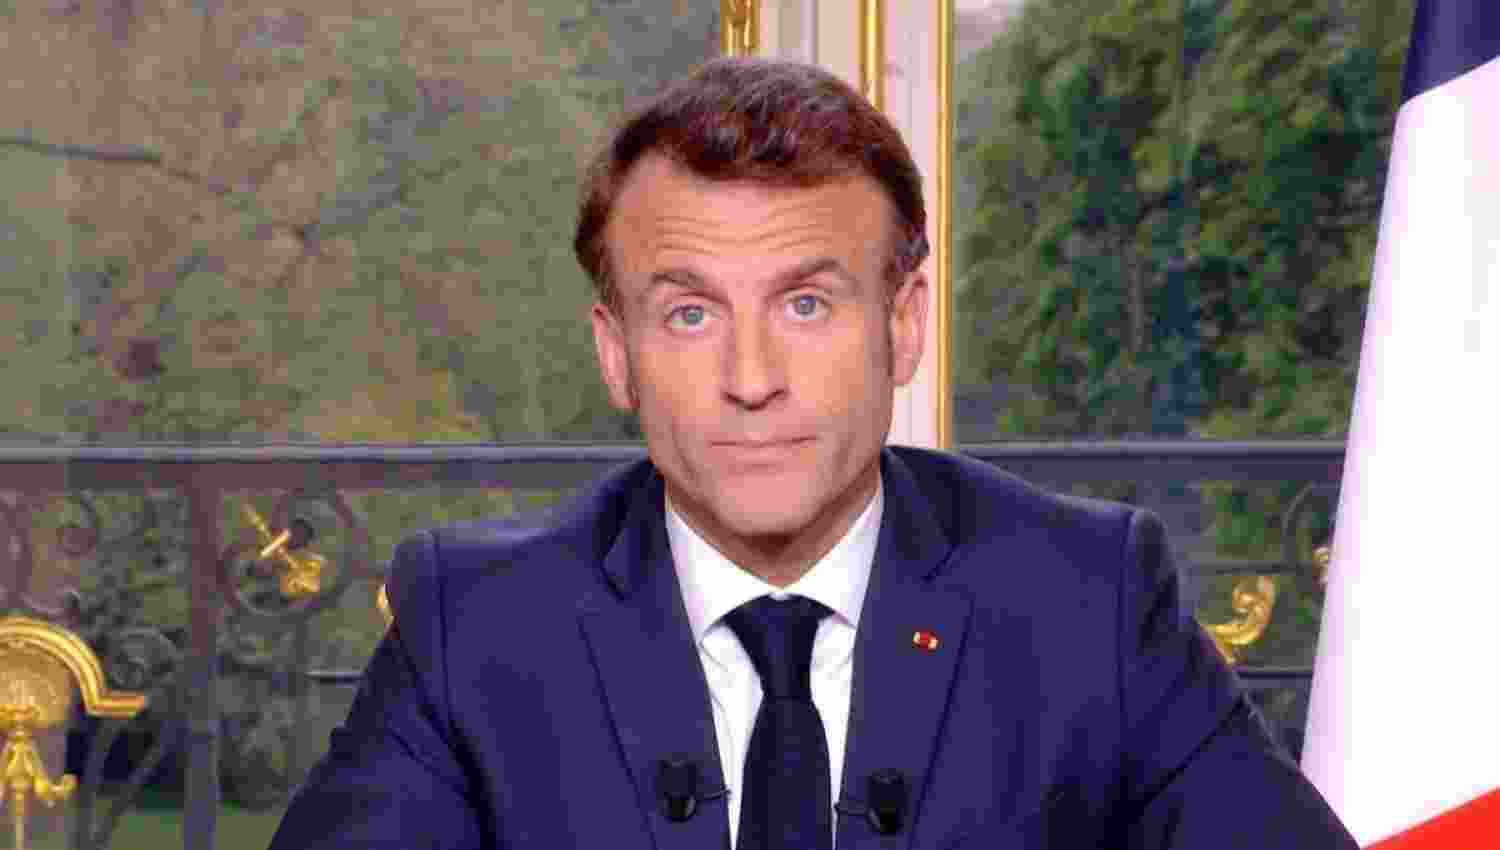 Why has Macron ordered snap elections in France?